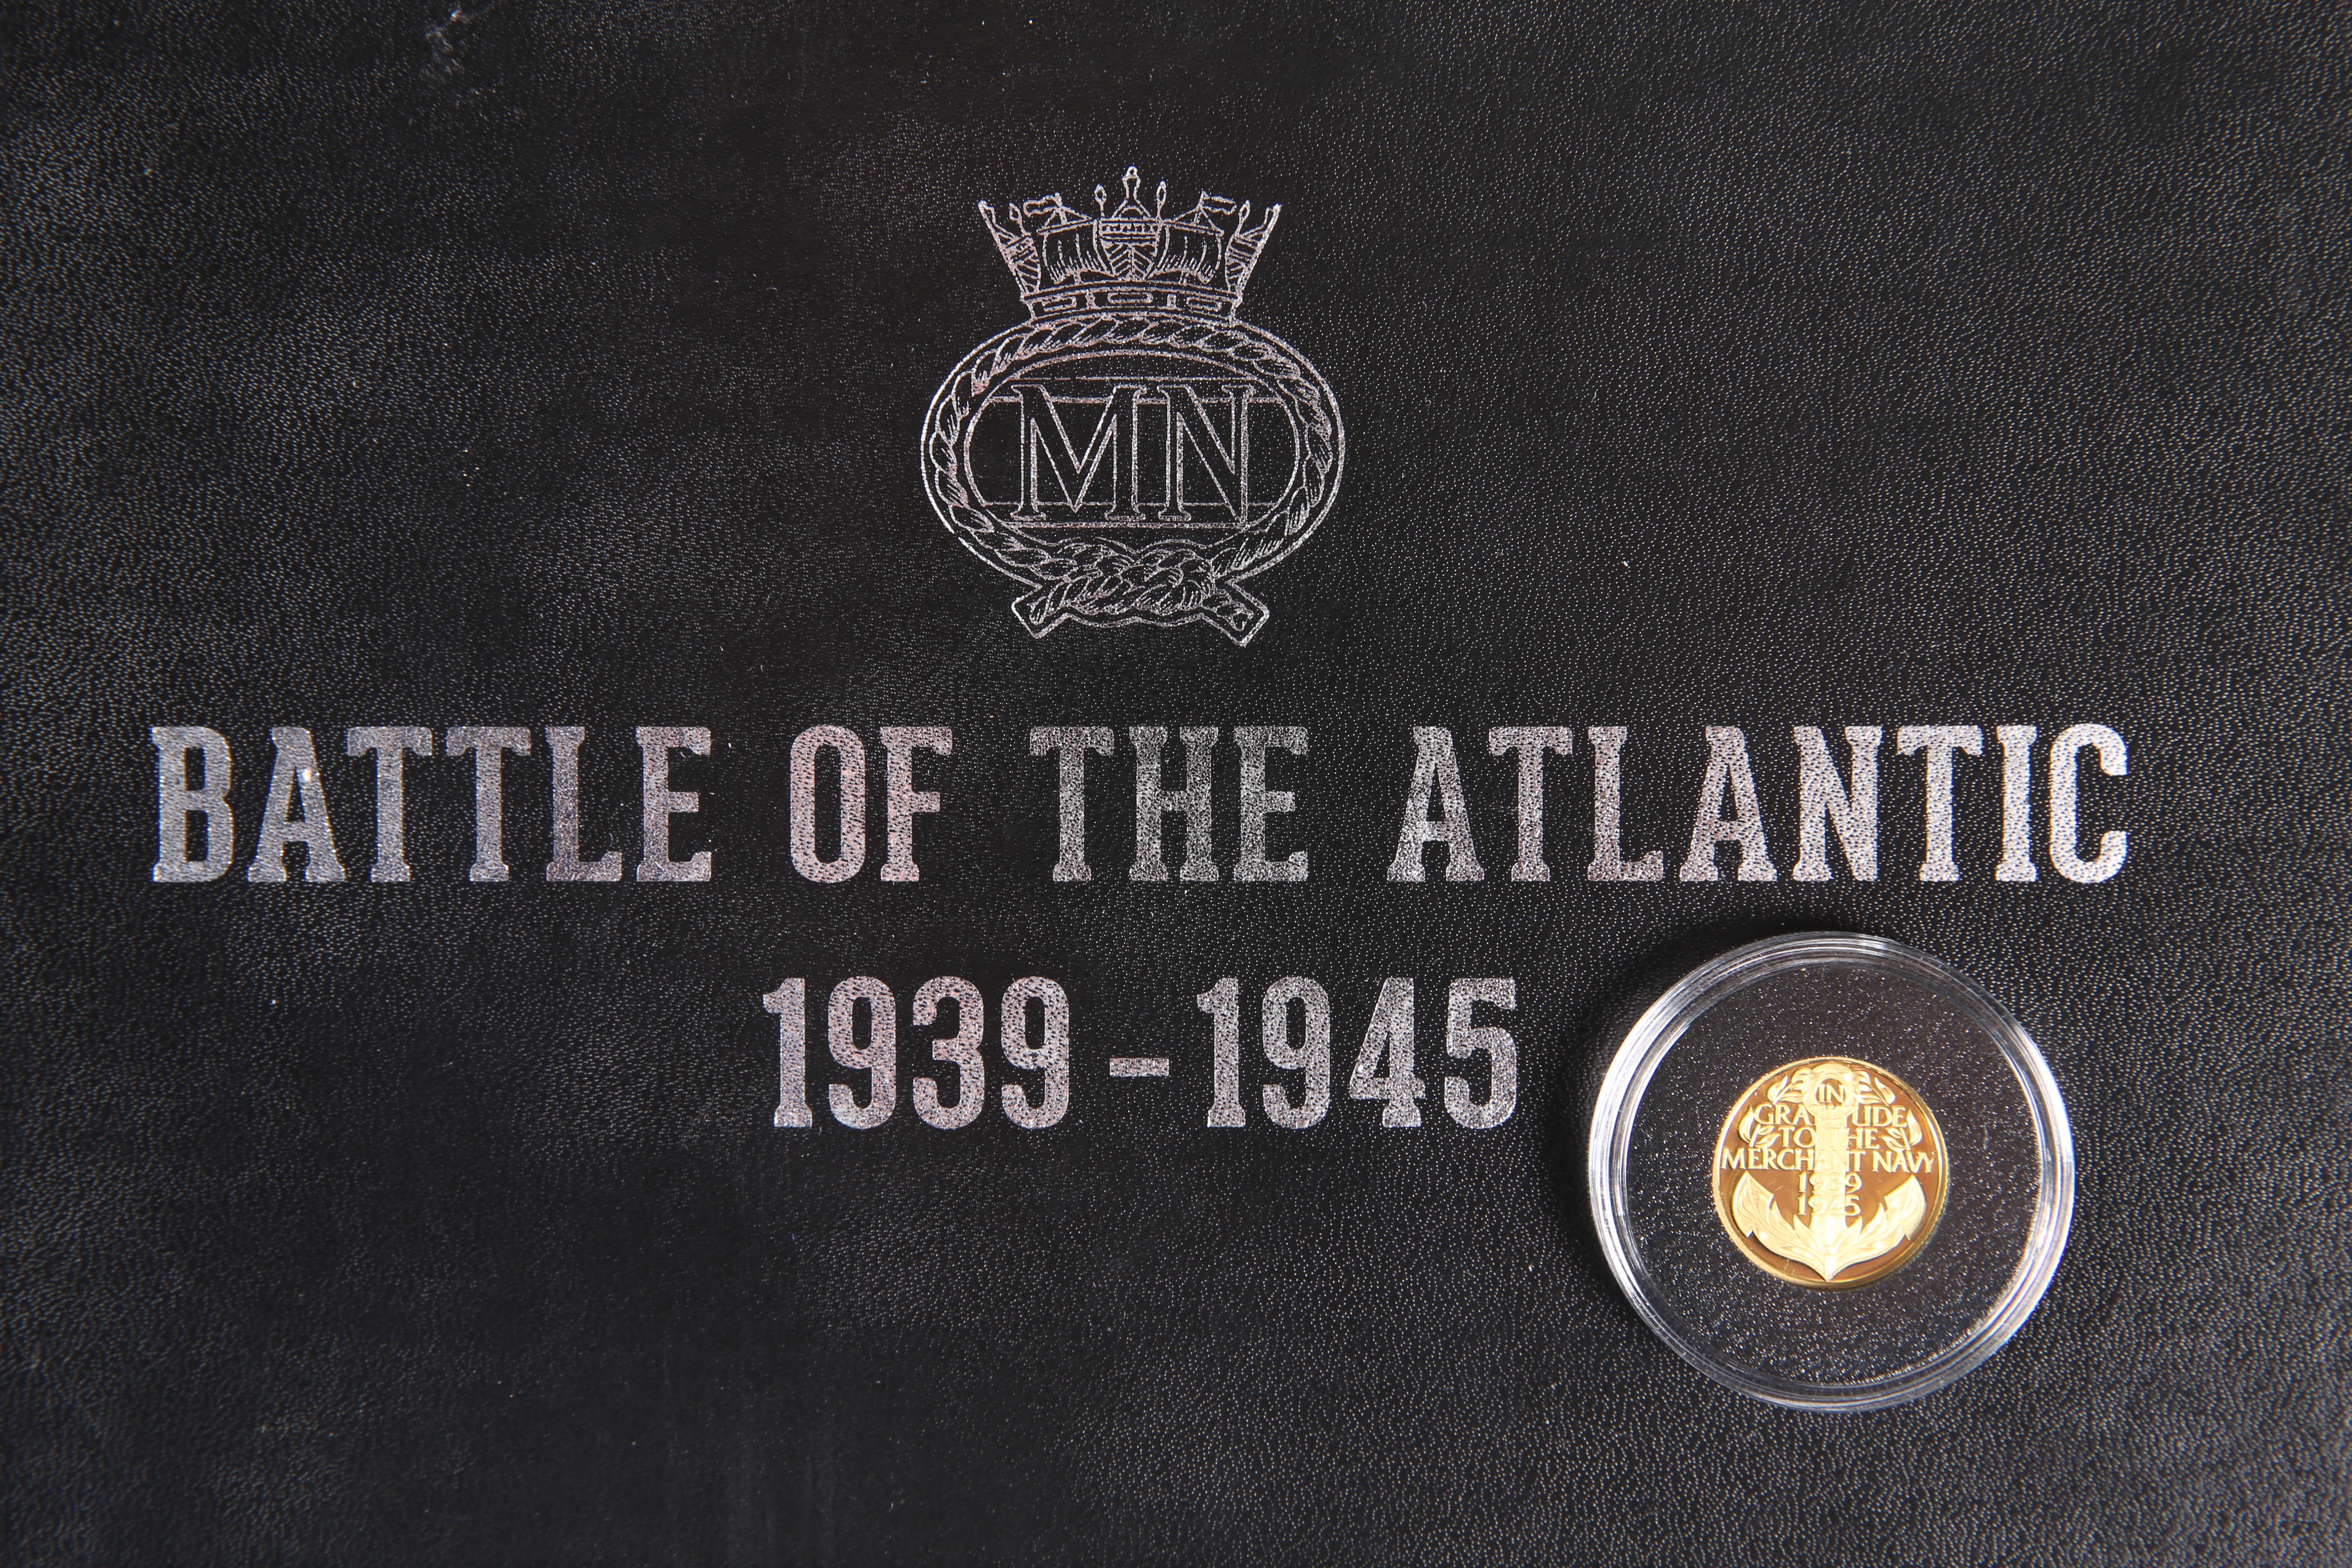 A GOLD PROOF QUARTER CROWN, "IN GRATITUDE TO THE MERCHANT NAVY 1939-1945", boxed, with certificate - Image 2 of 3